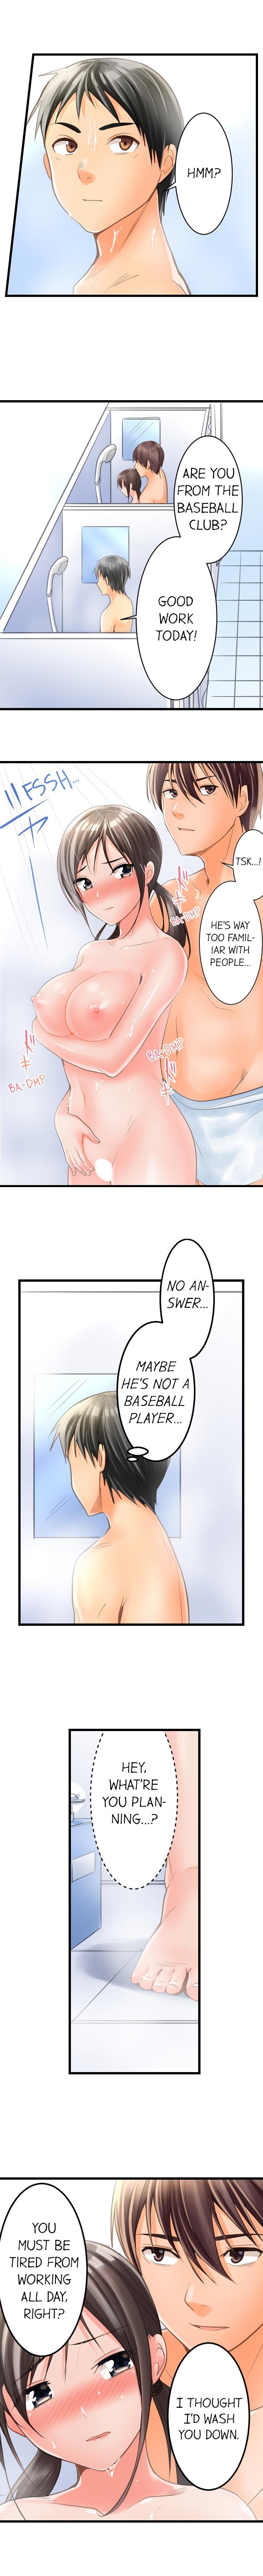 The Day She Became a Sex Toy (Complete] 40